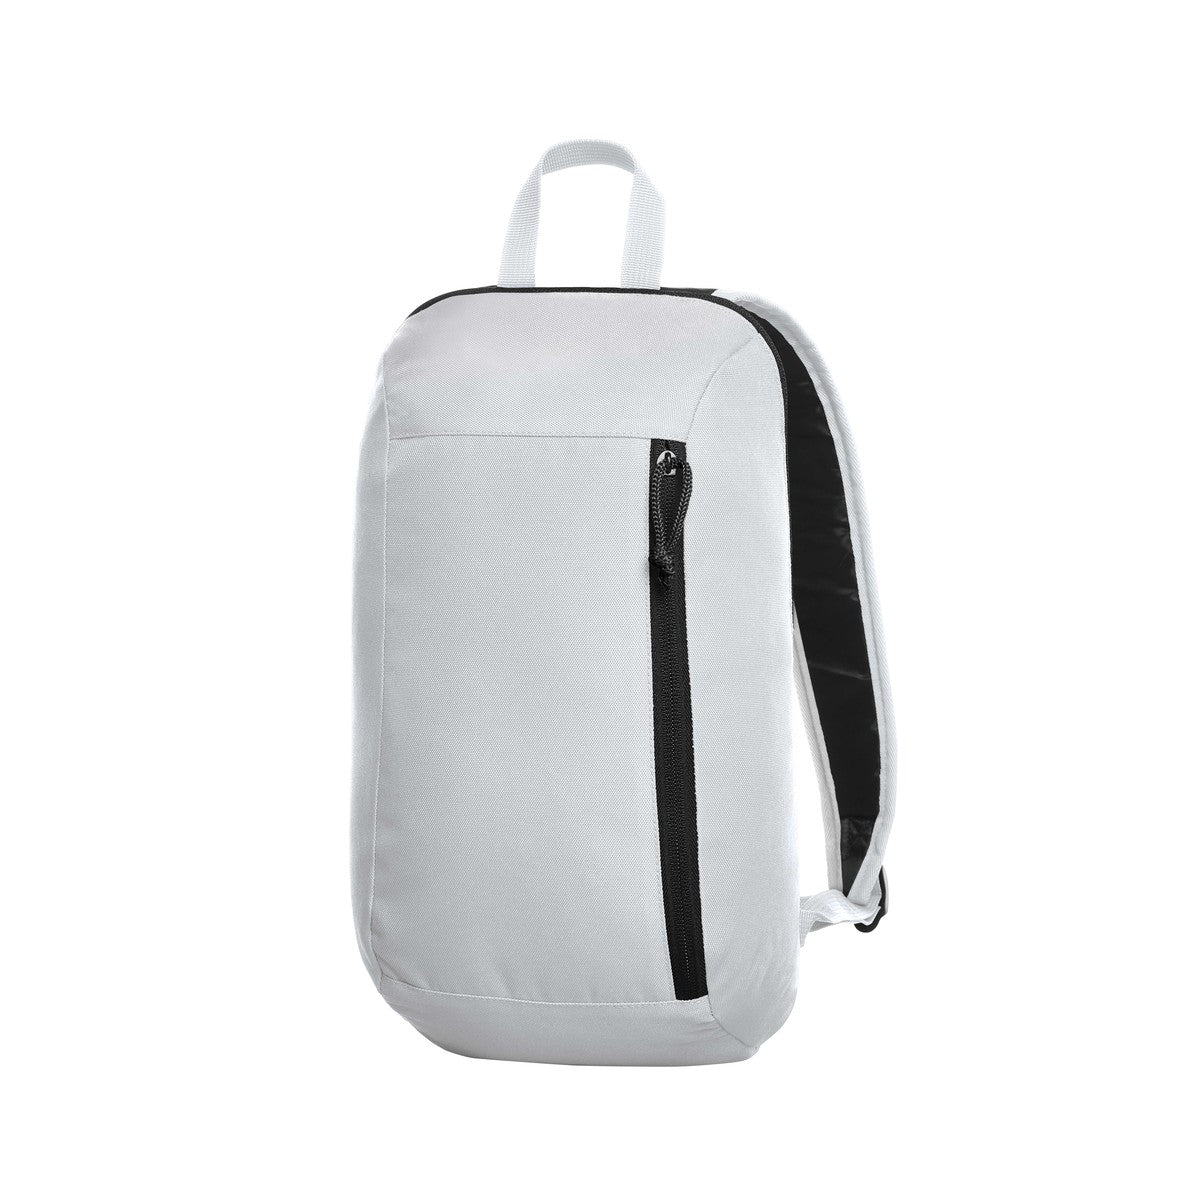 FLOW Backpack - 2 Pezzi